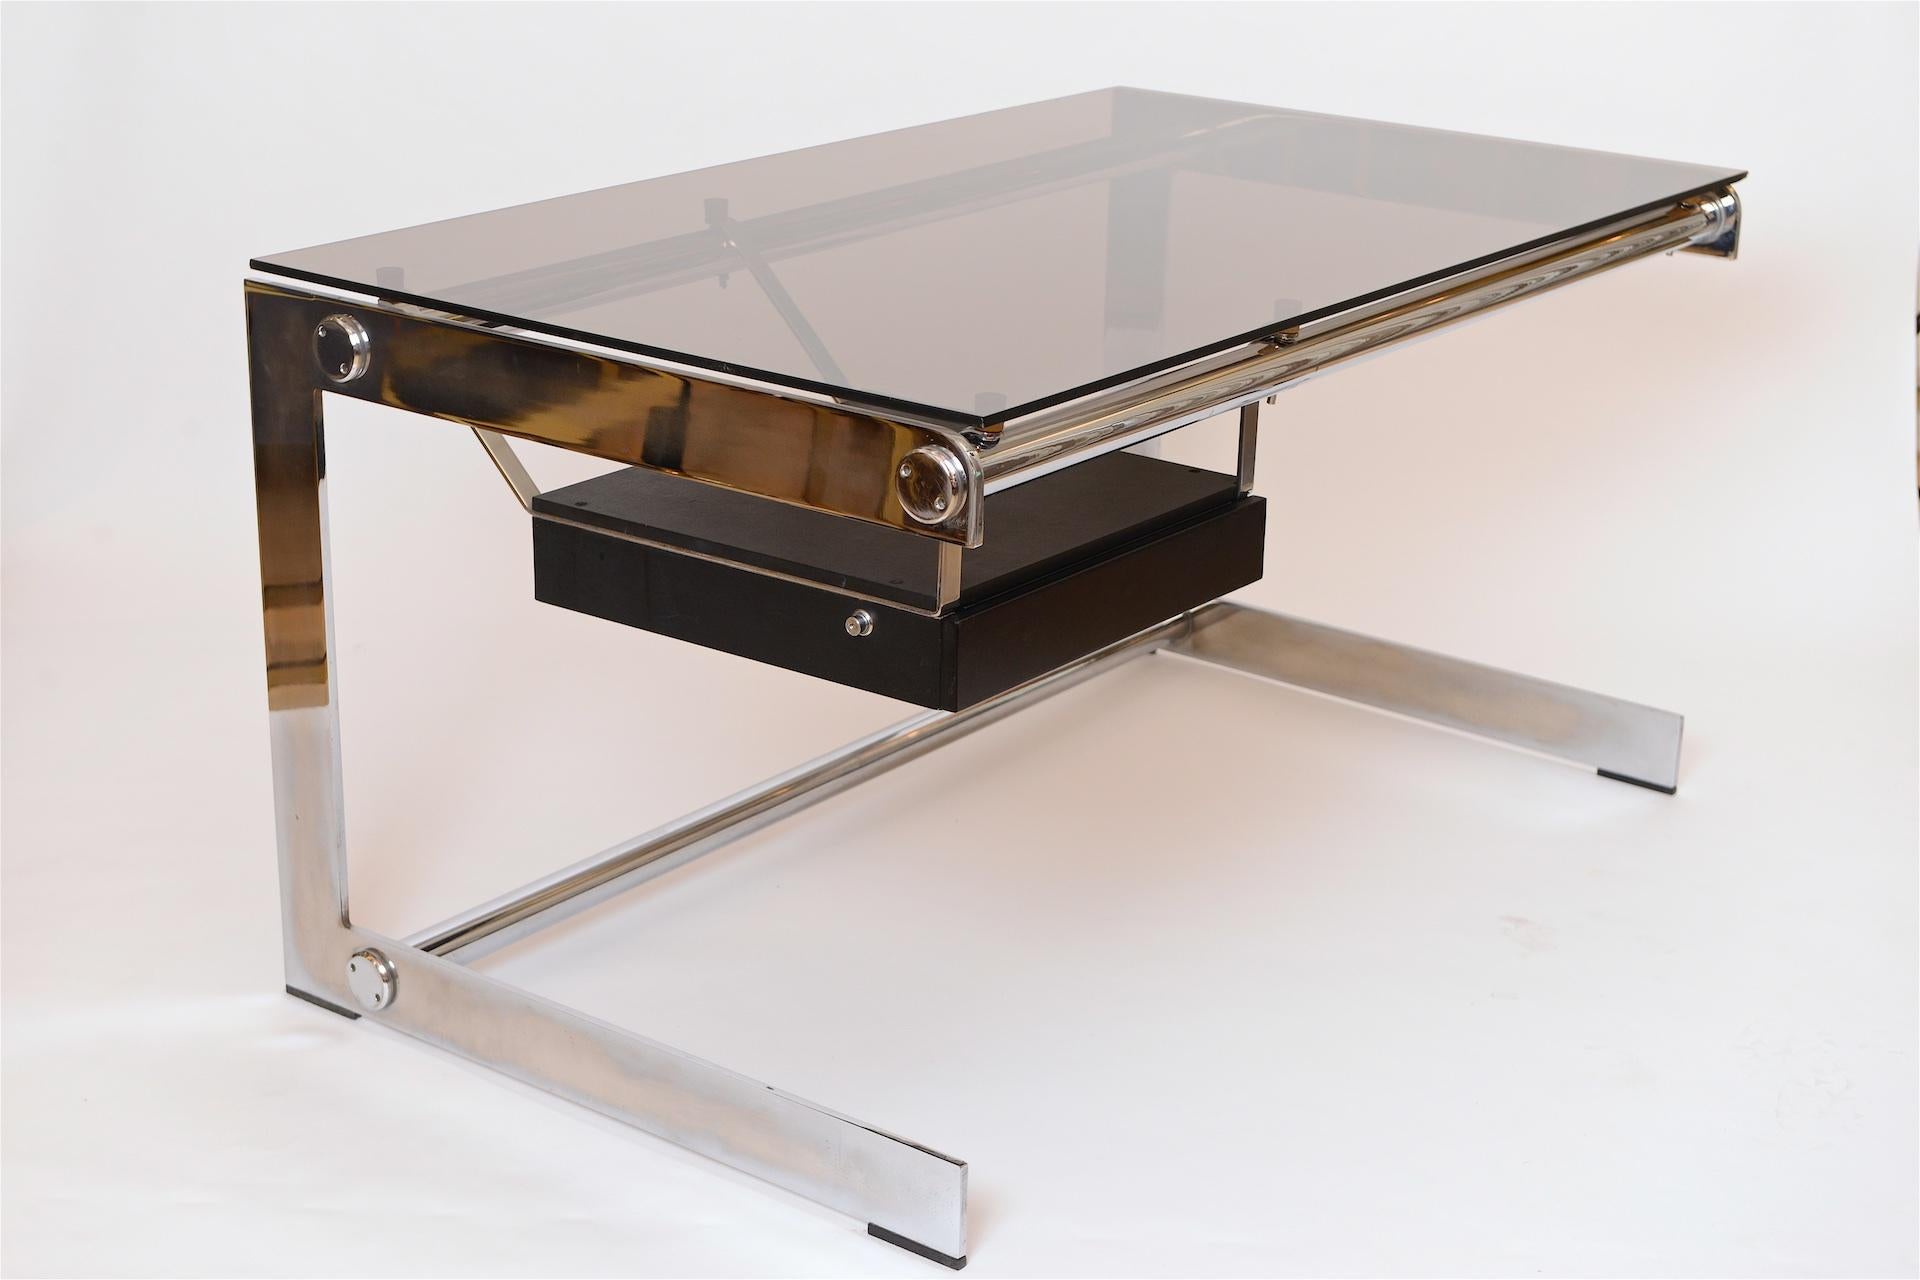 Rare chromed steel and grey glass desk, circa 1965. 

Designed by architect Gilles Bouchez and produced by Airbourne in France.
This is the smaller version 

Sleek, minimal and ahead of its time. 

Glass is original and stamped